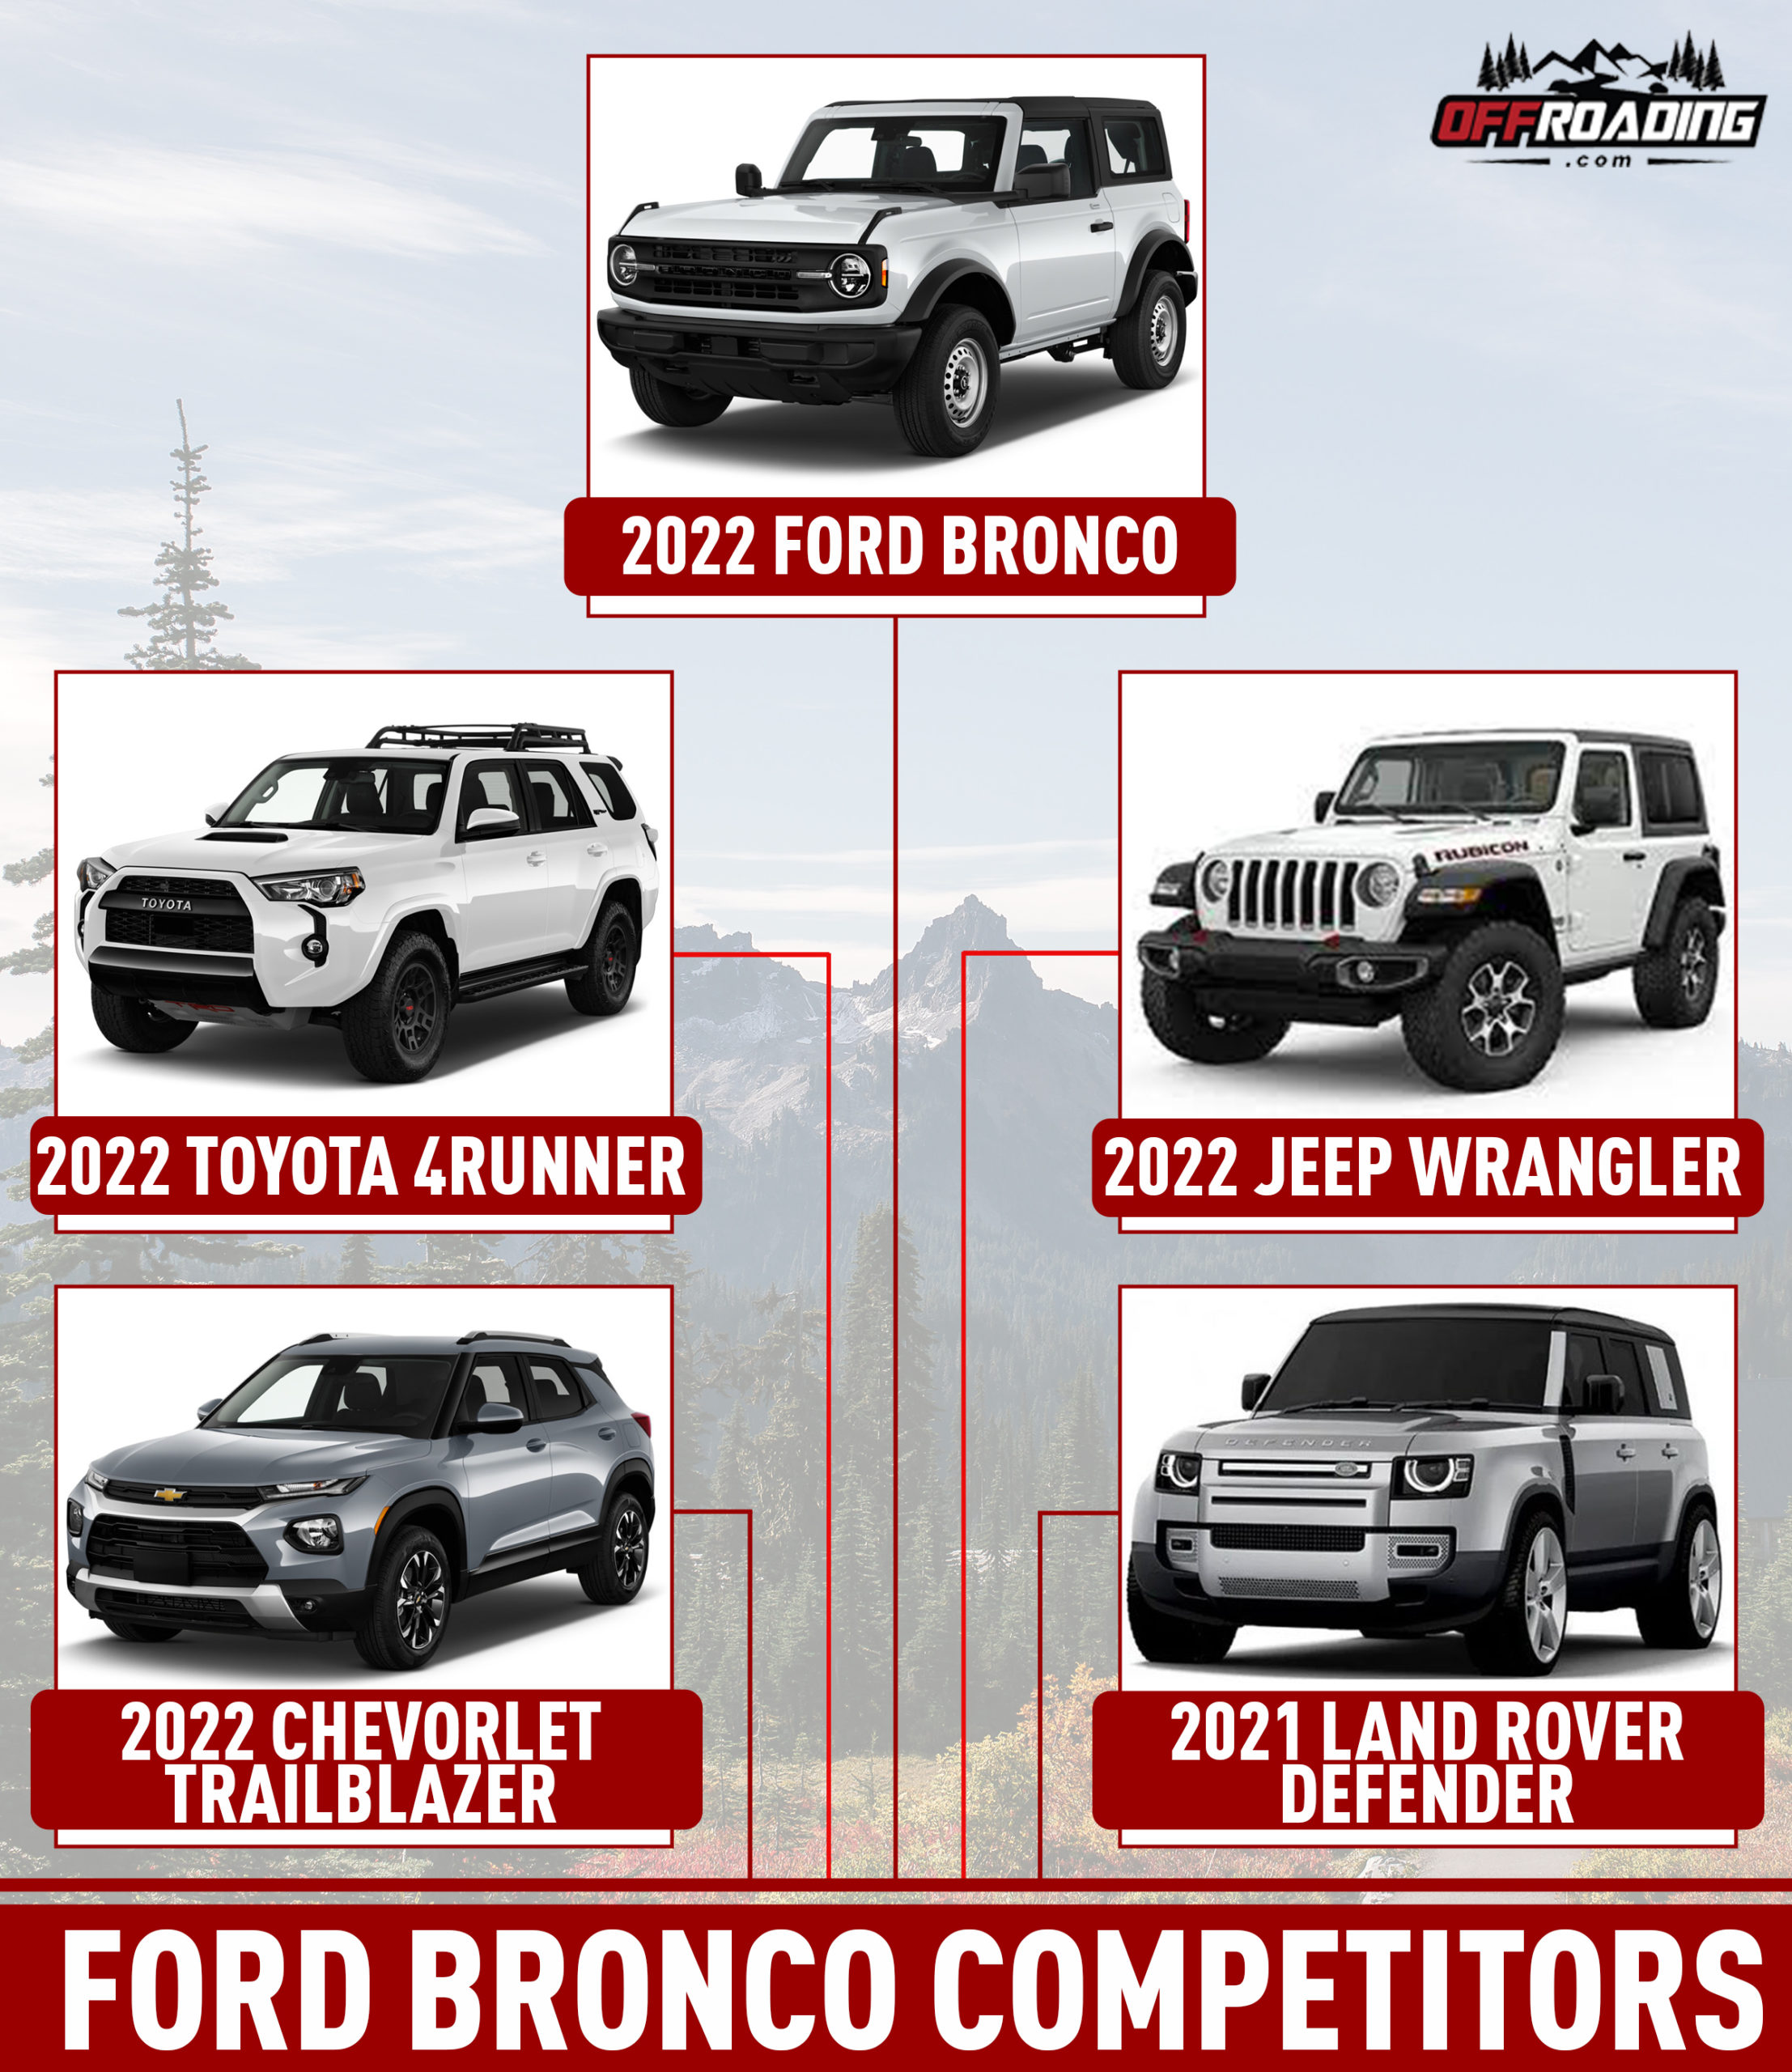 The 2022 Ford Bronco Towing Capacity – An In-depth Comparison